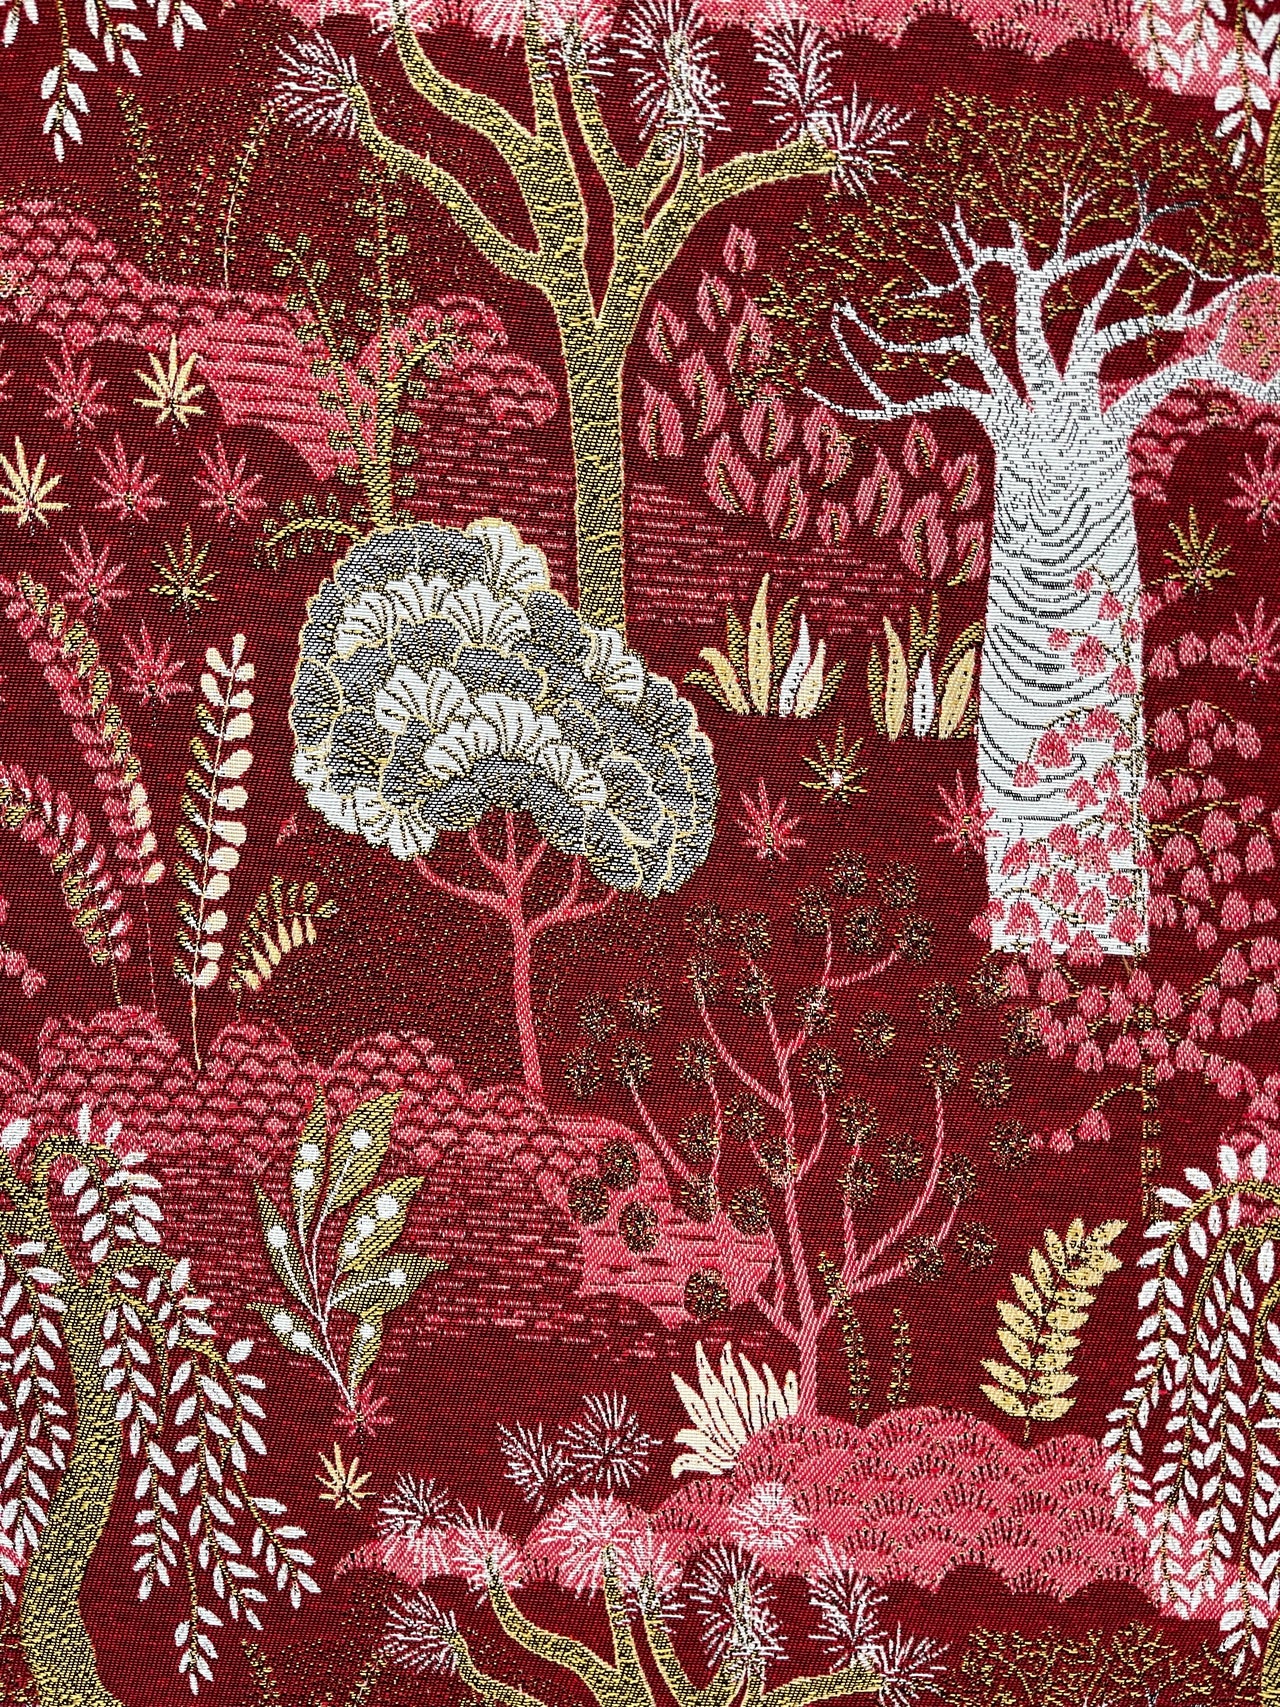 Baobab Upholstery Fabric Ruby Red Gold Textile Floral Home Curtains Blinds Upholstery